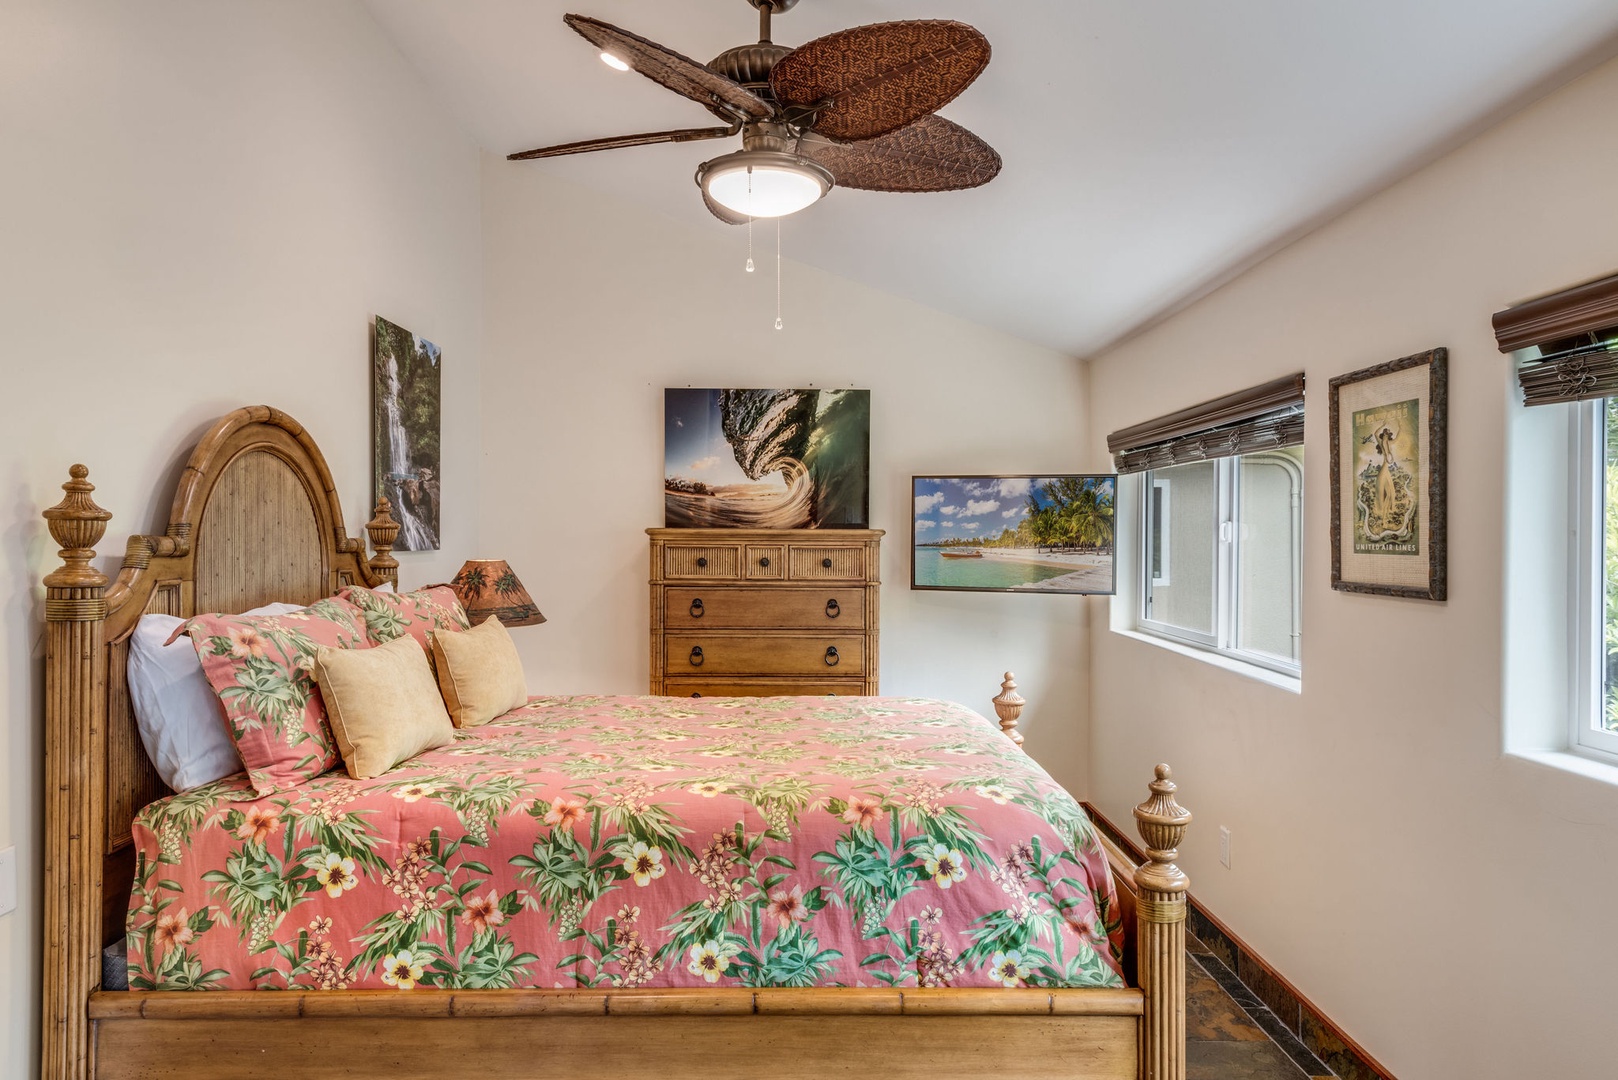 Kailua Kona Vacation Rentals, Kona Beach Bungalows** - Retreat to the Moana Hale Upstairs Suite, offering an ensuite bath and tranquil serenity.